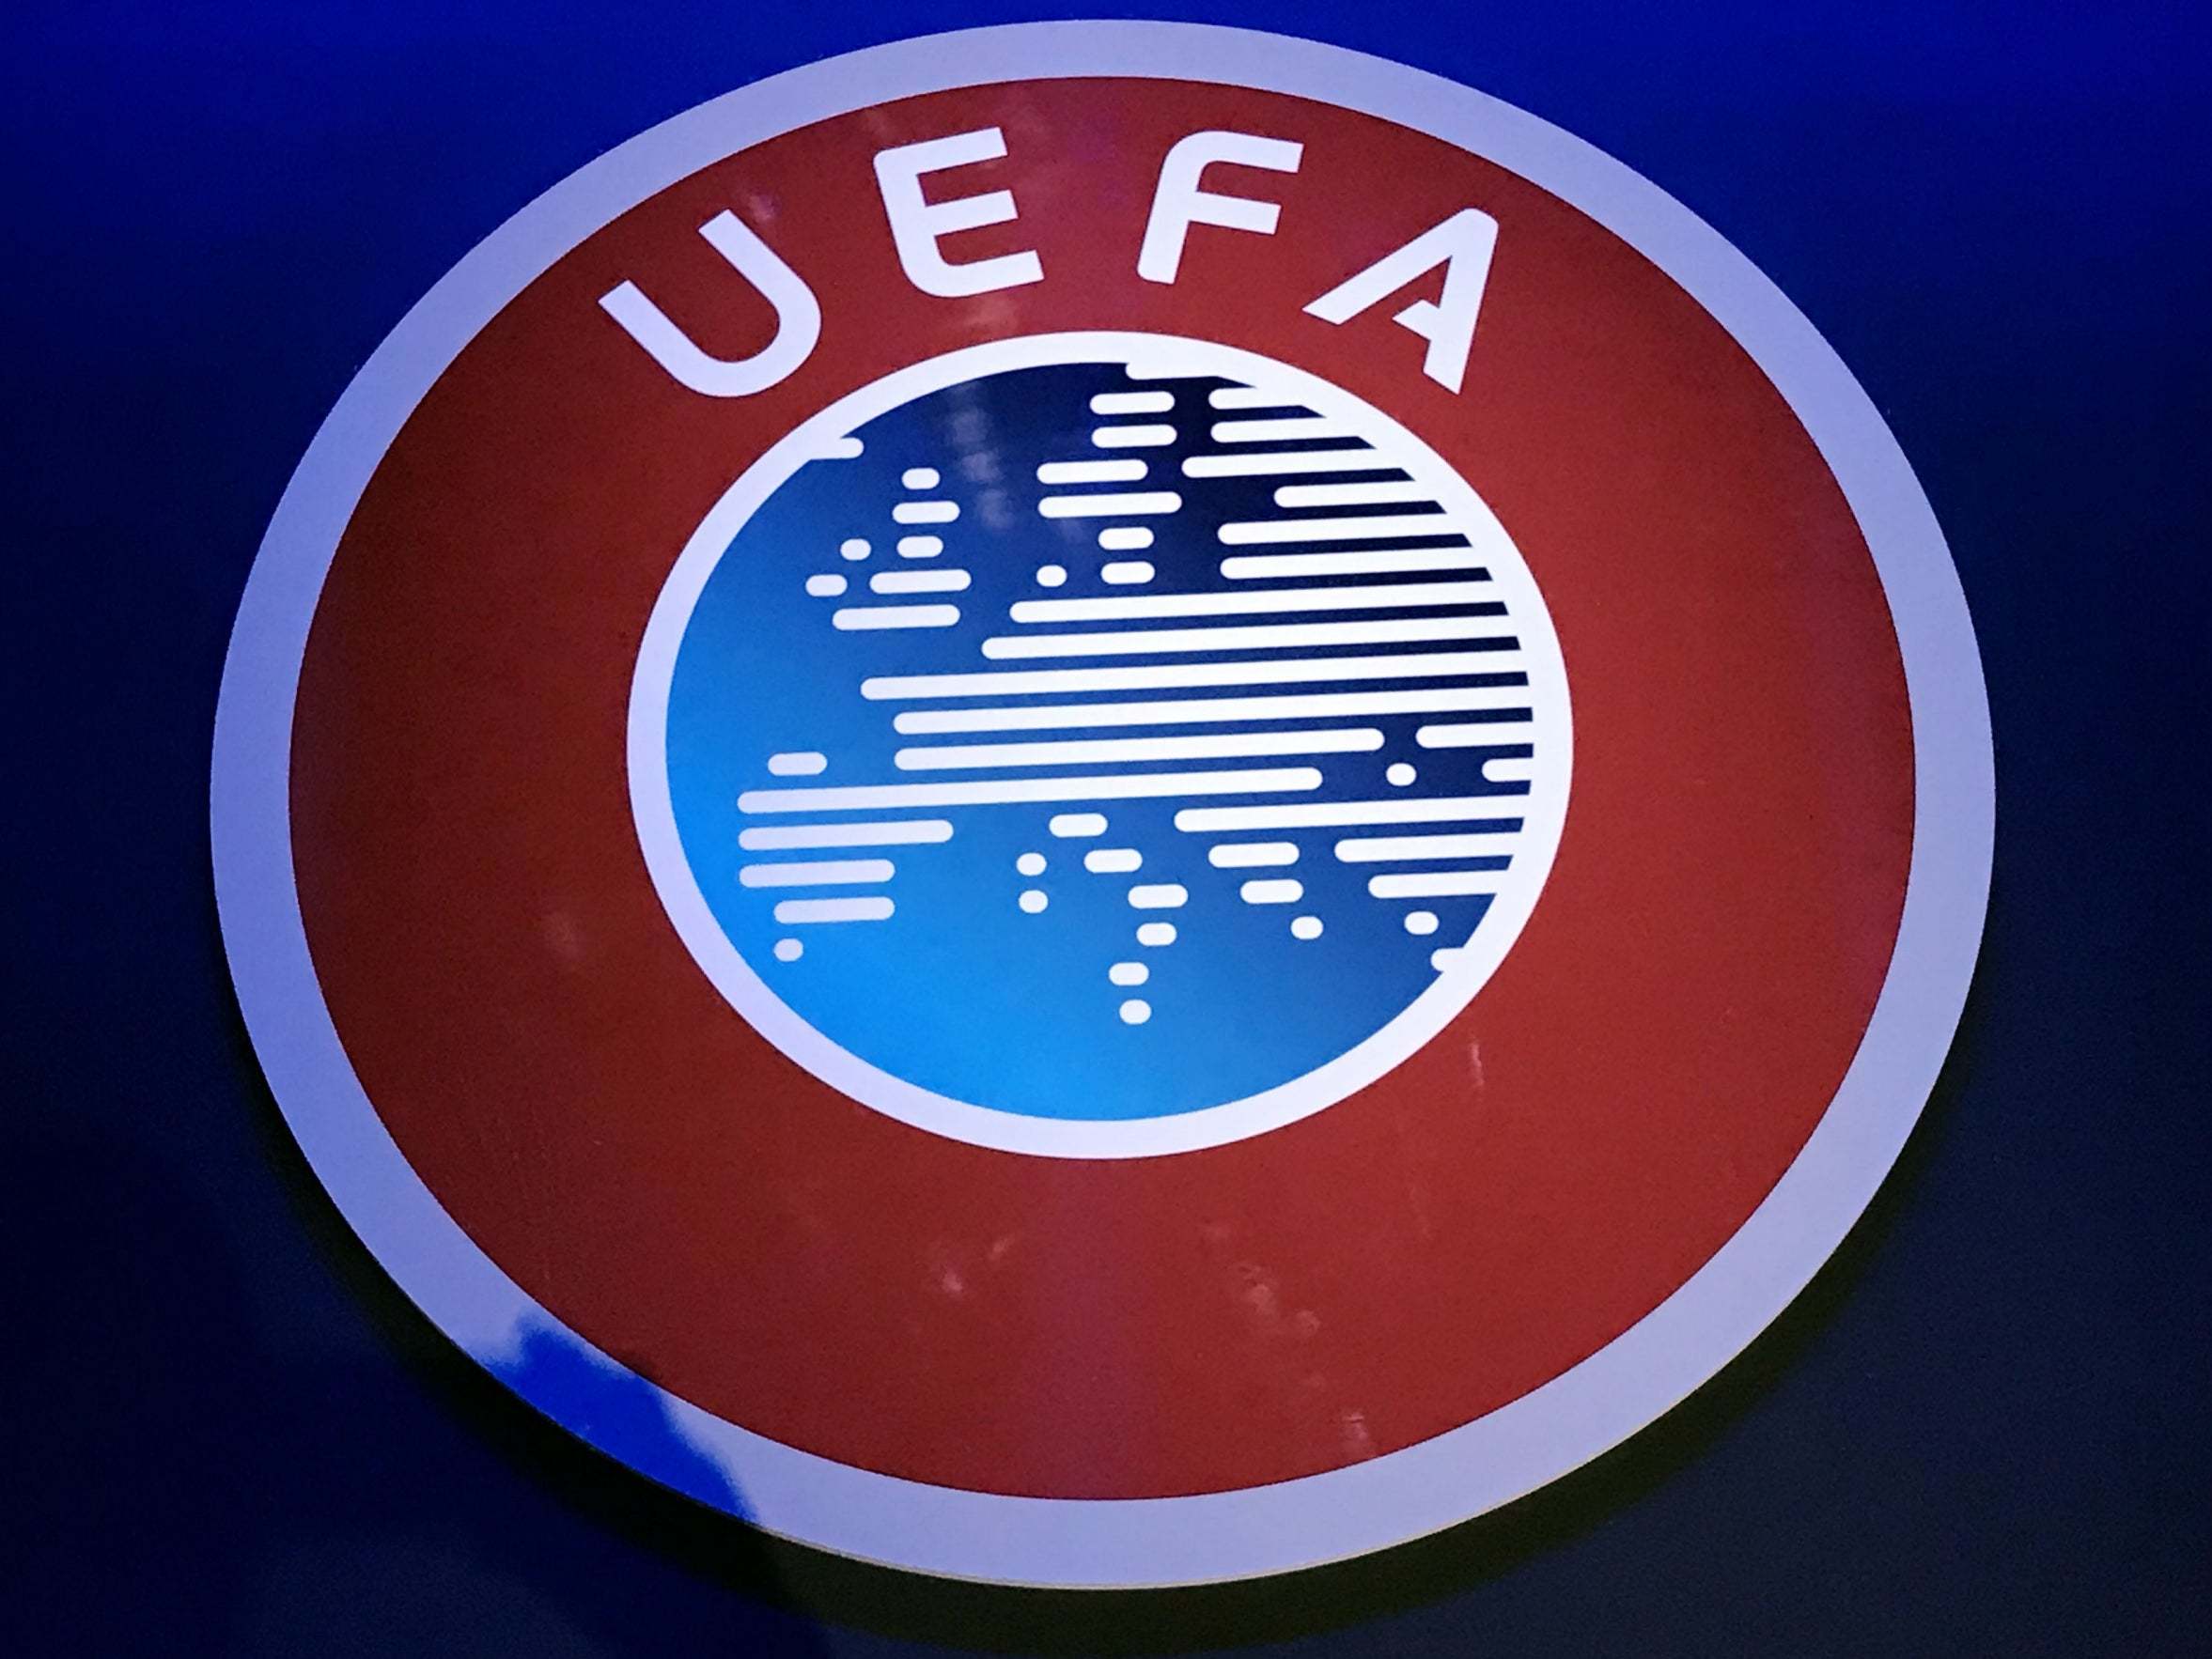 Uefa release over £200m to support national federations through coronavirus crisis